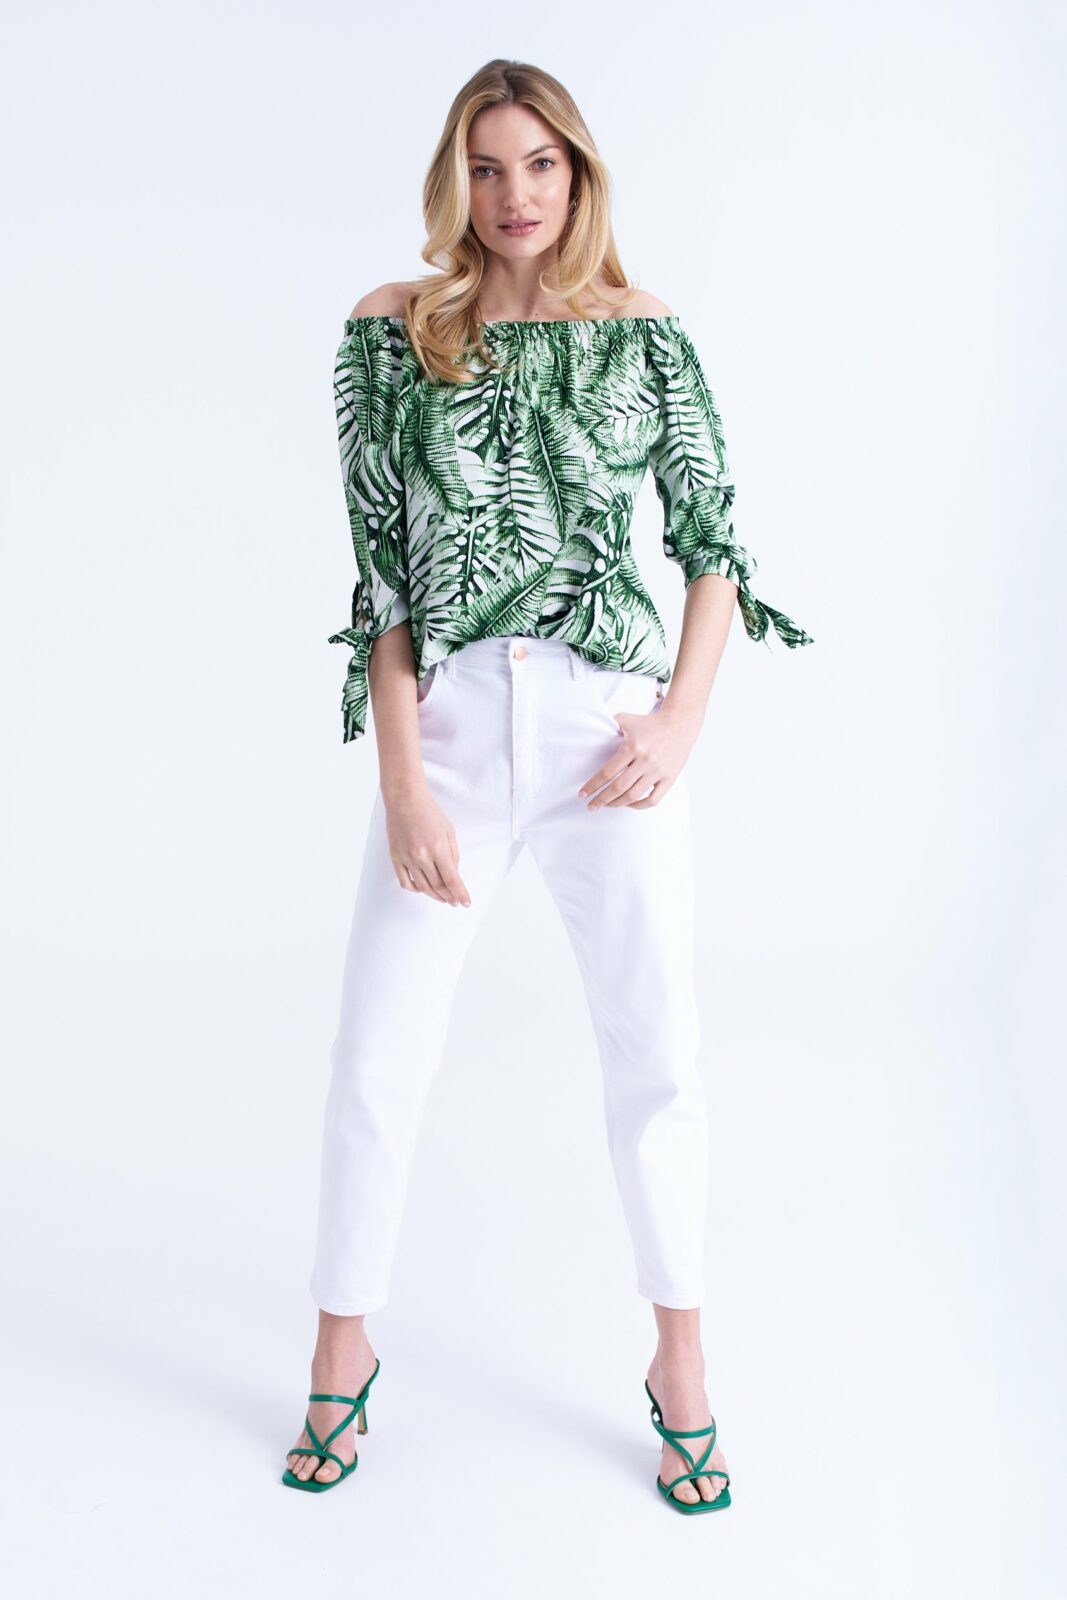 Greenpoint Woman's Blouse